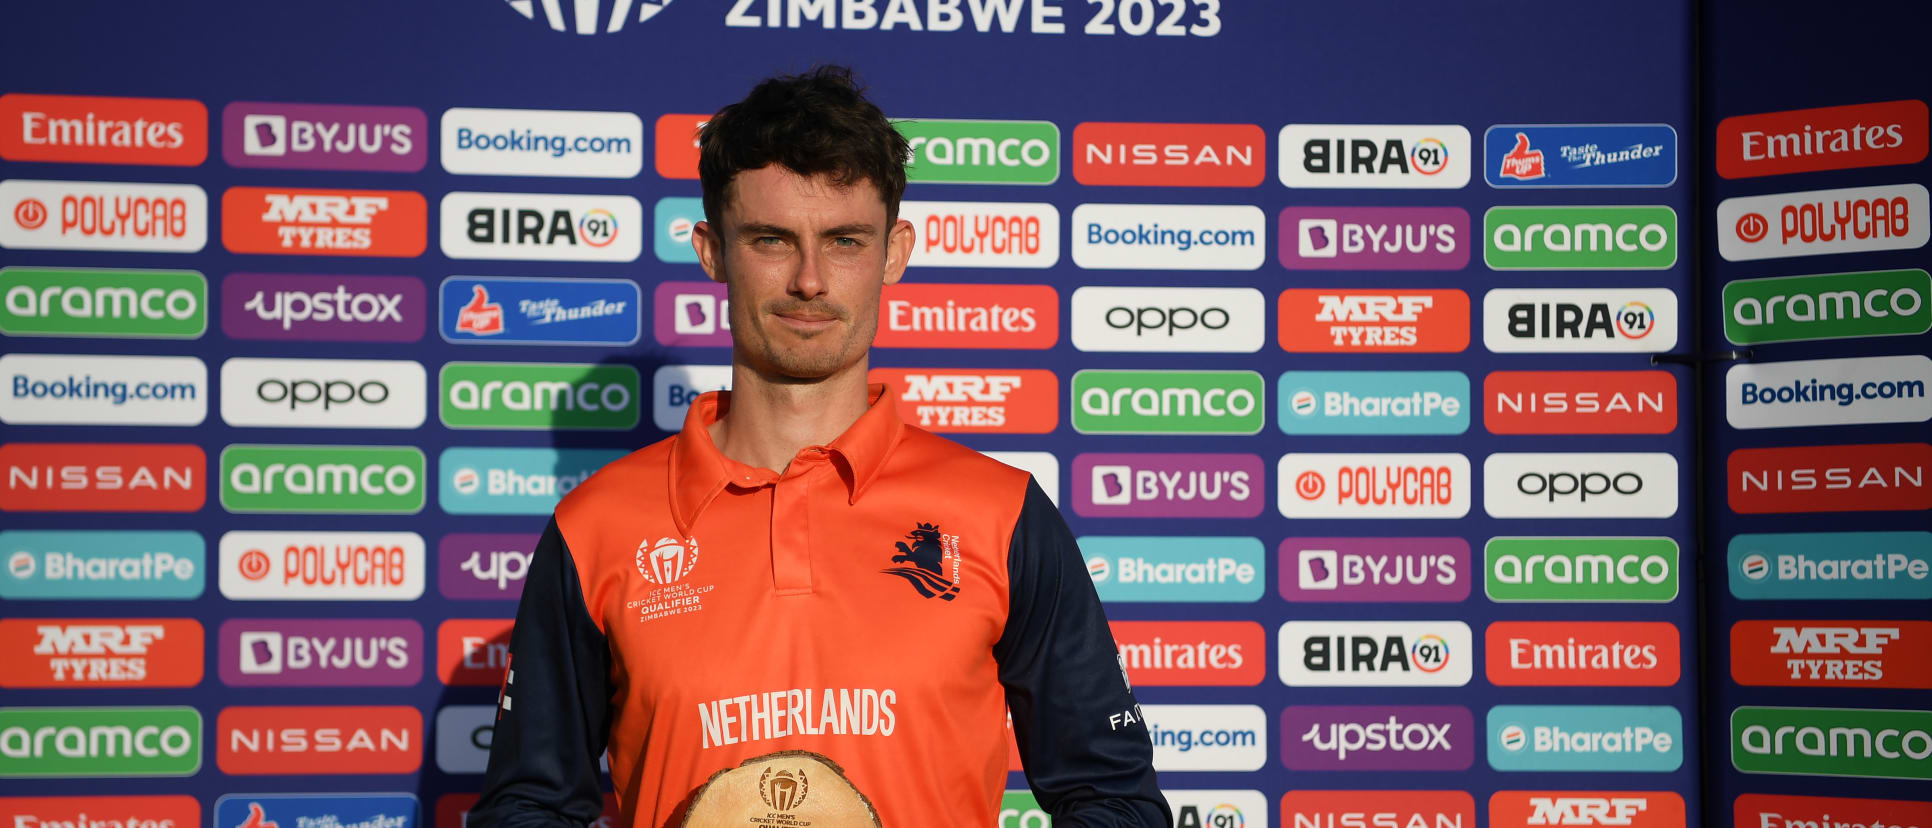 Scott Edwards of the Netherlands poses after being named Player of the Match following the ICC Men's Cricket World Cup Qualifier Zimbabwe 2023 match between the Netherlands and USA at Takashinga Cricket Club on June 22, 2023 in Harare, Zimbabwe.